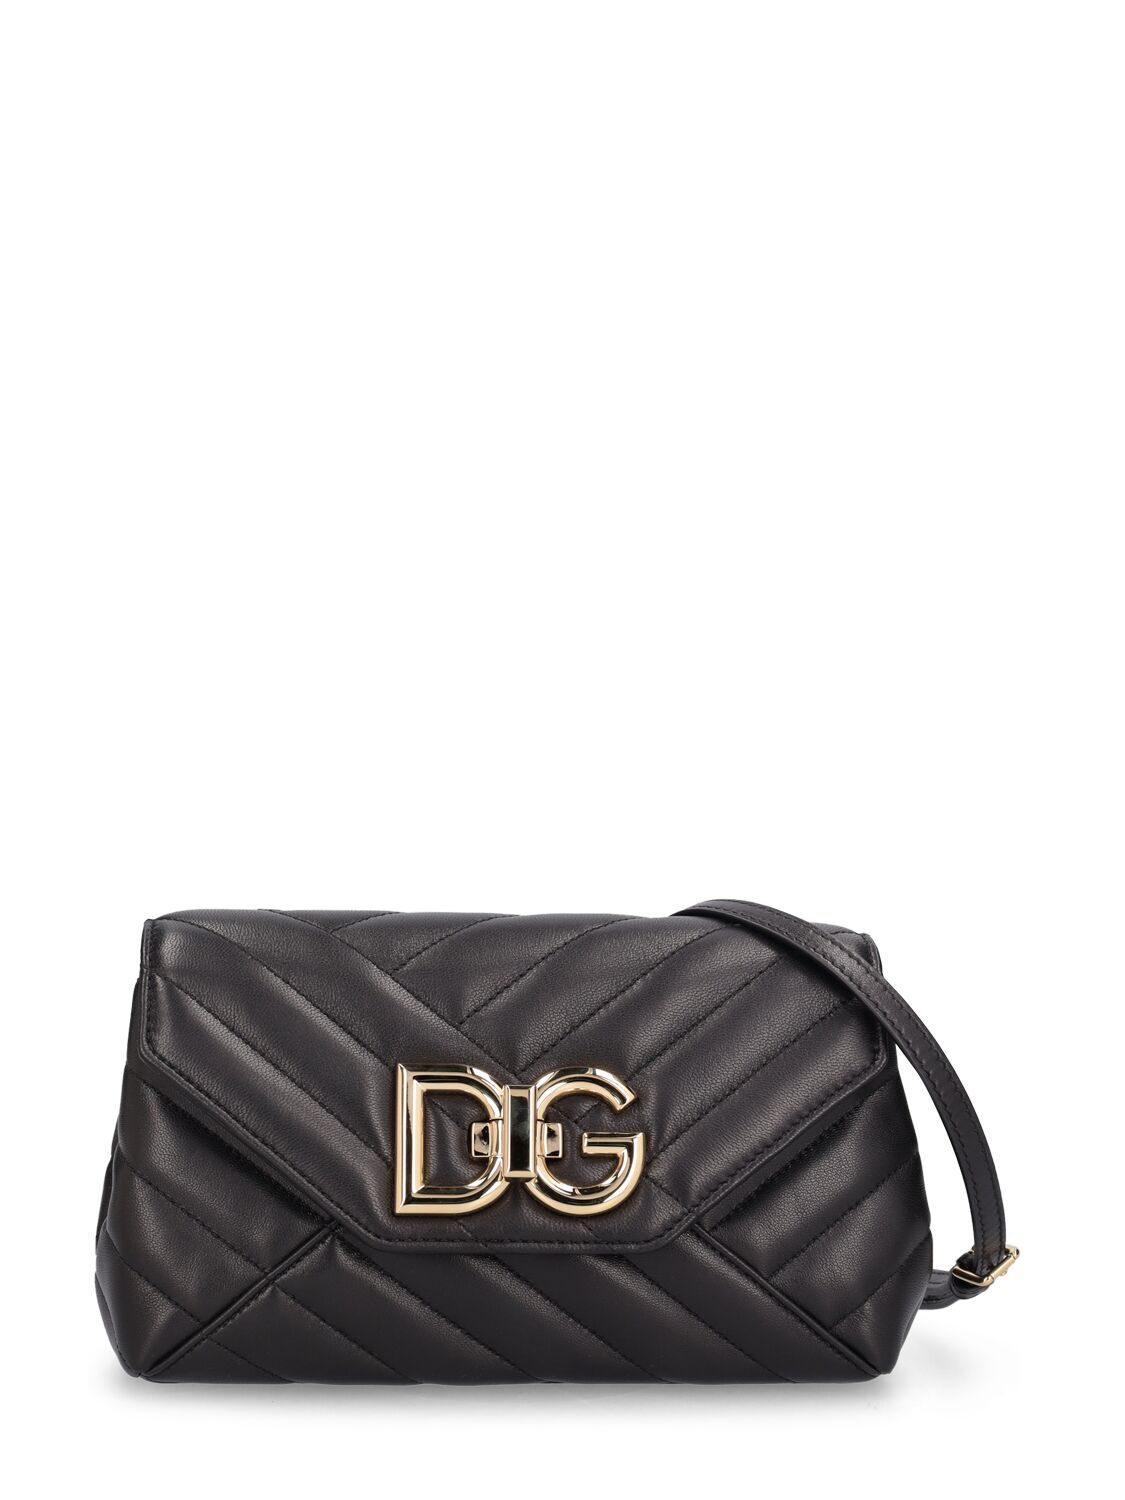 DOLCE & GABBANA Small Quilted Leather Shoulder Bag in black